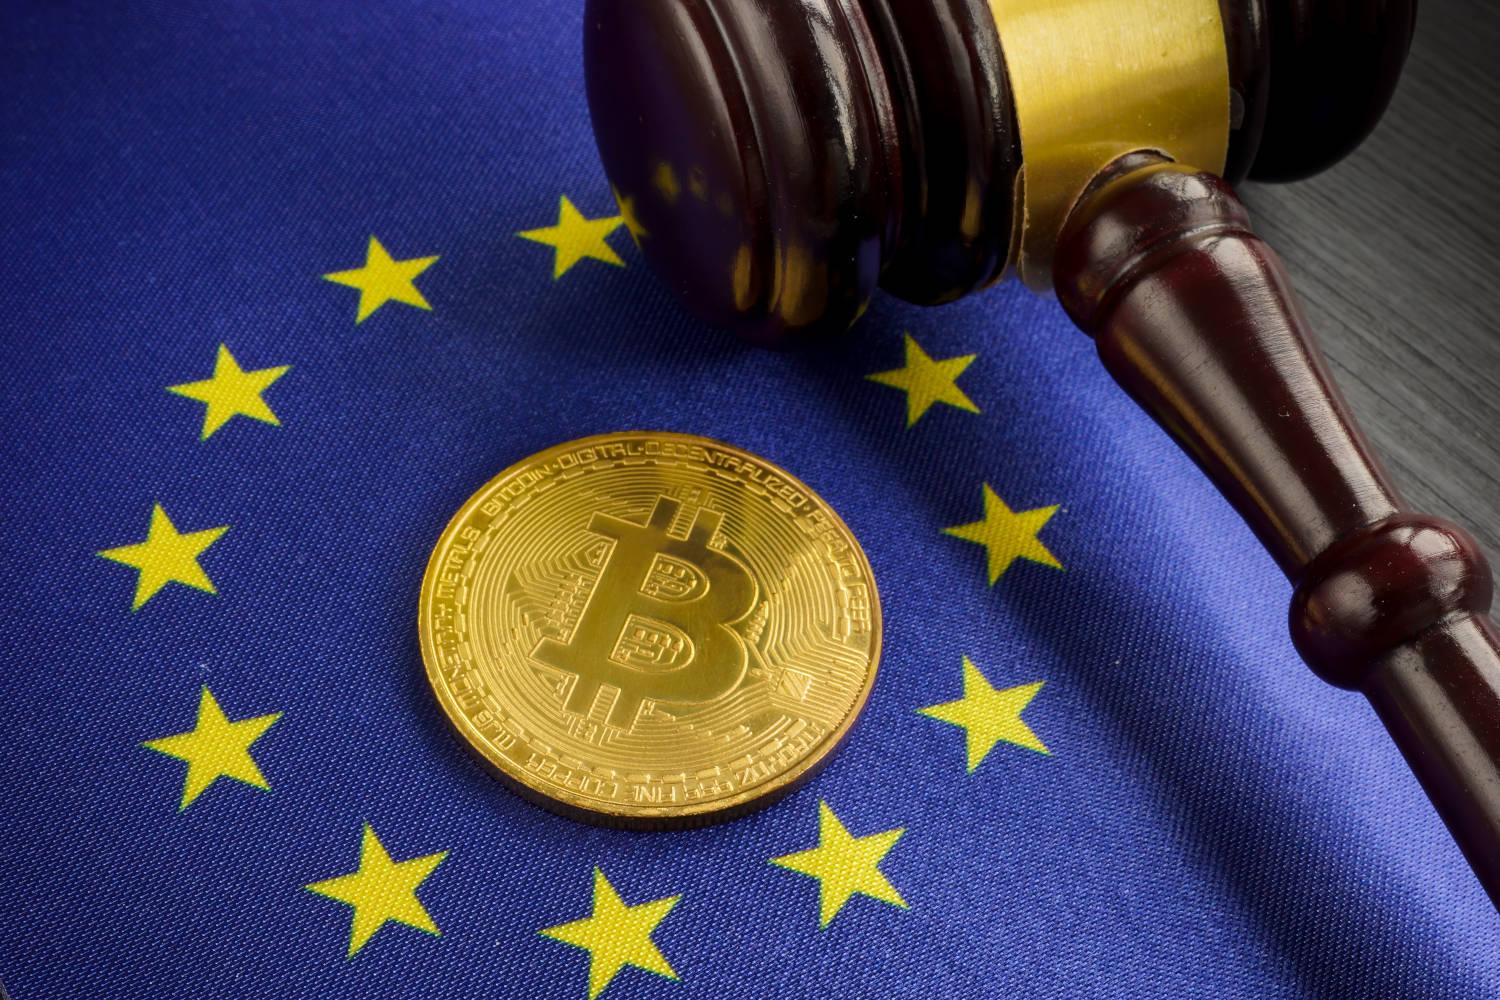 European Law on Crypo assets